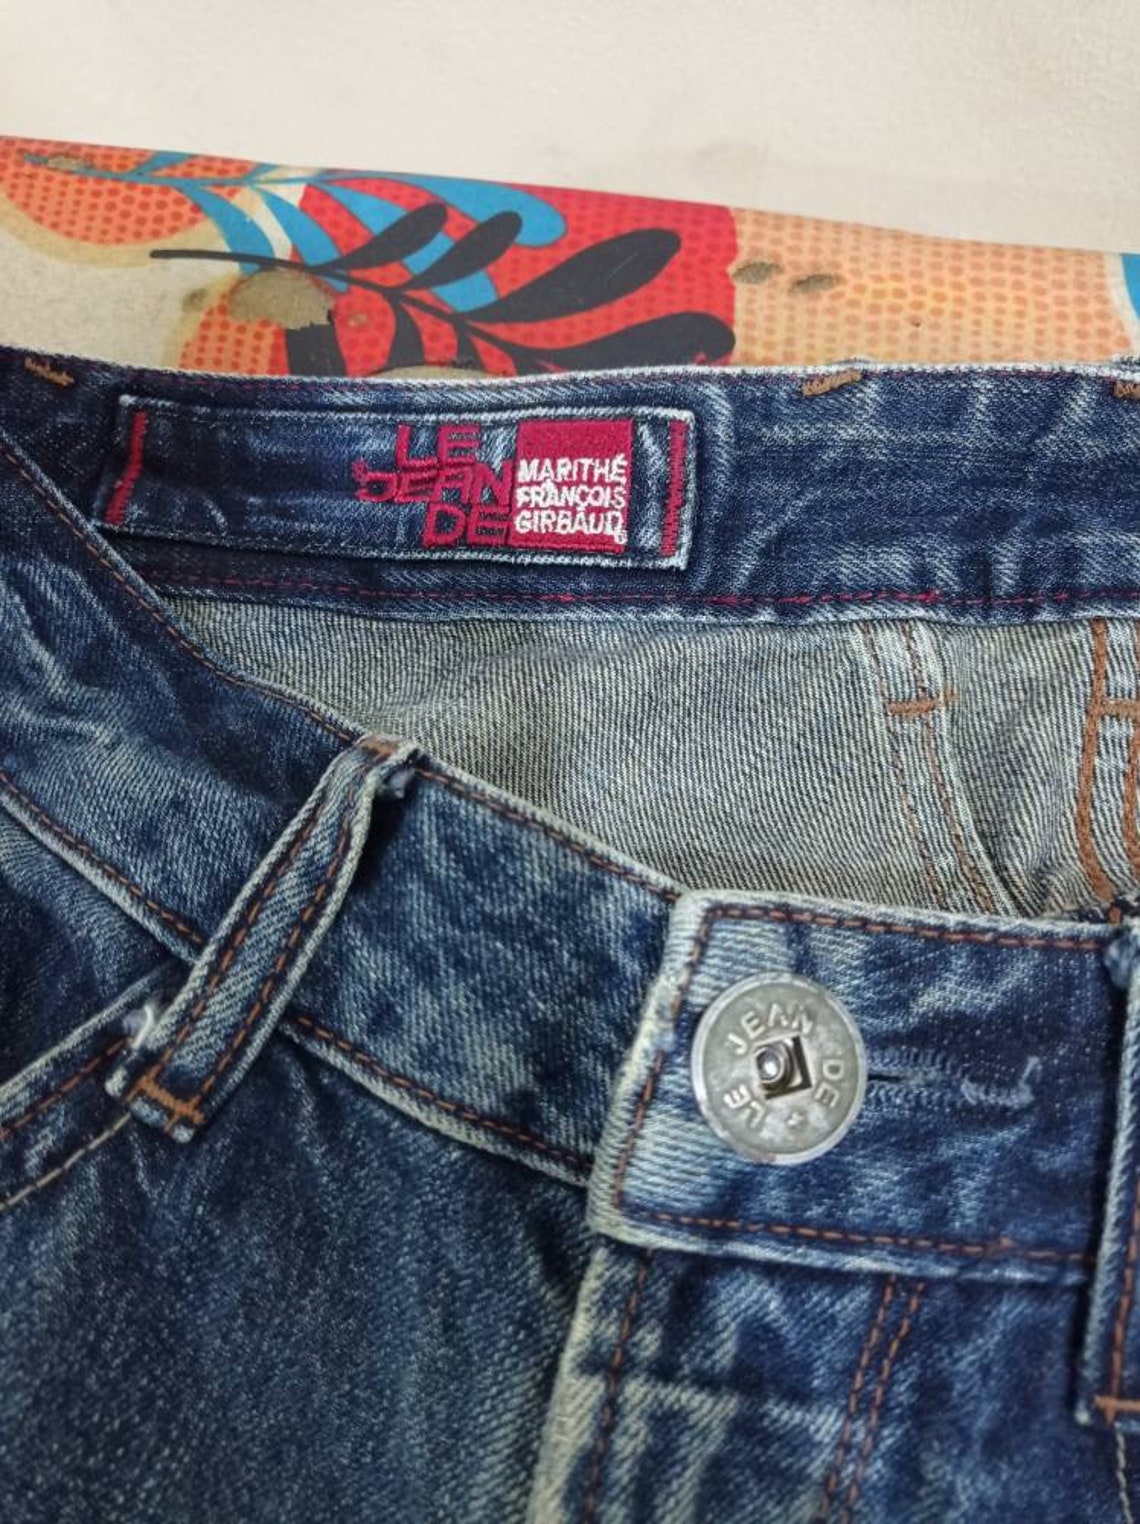 90s Marithe francois girbaud paint faded denim jeans W 32 L 34 | Etsy